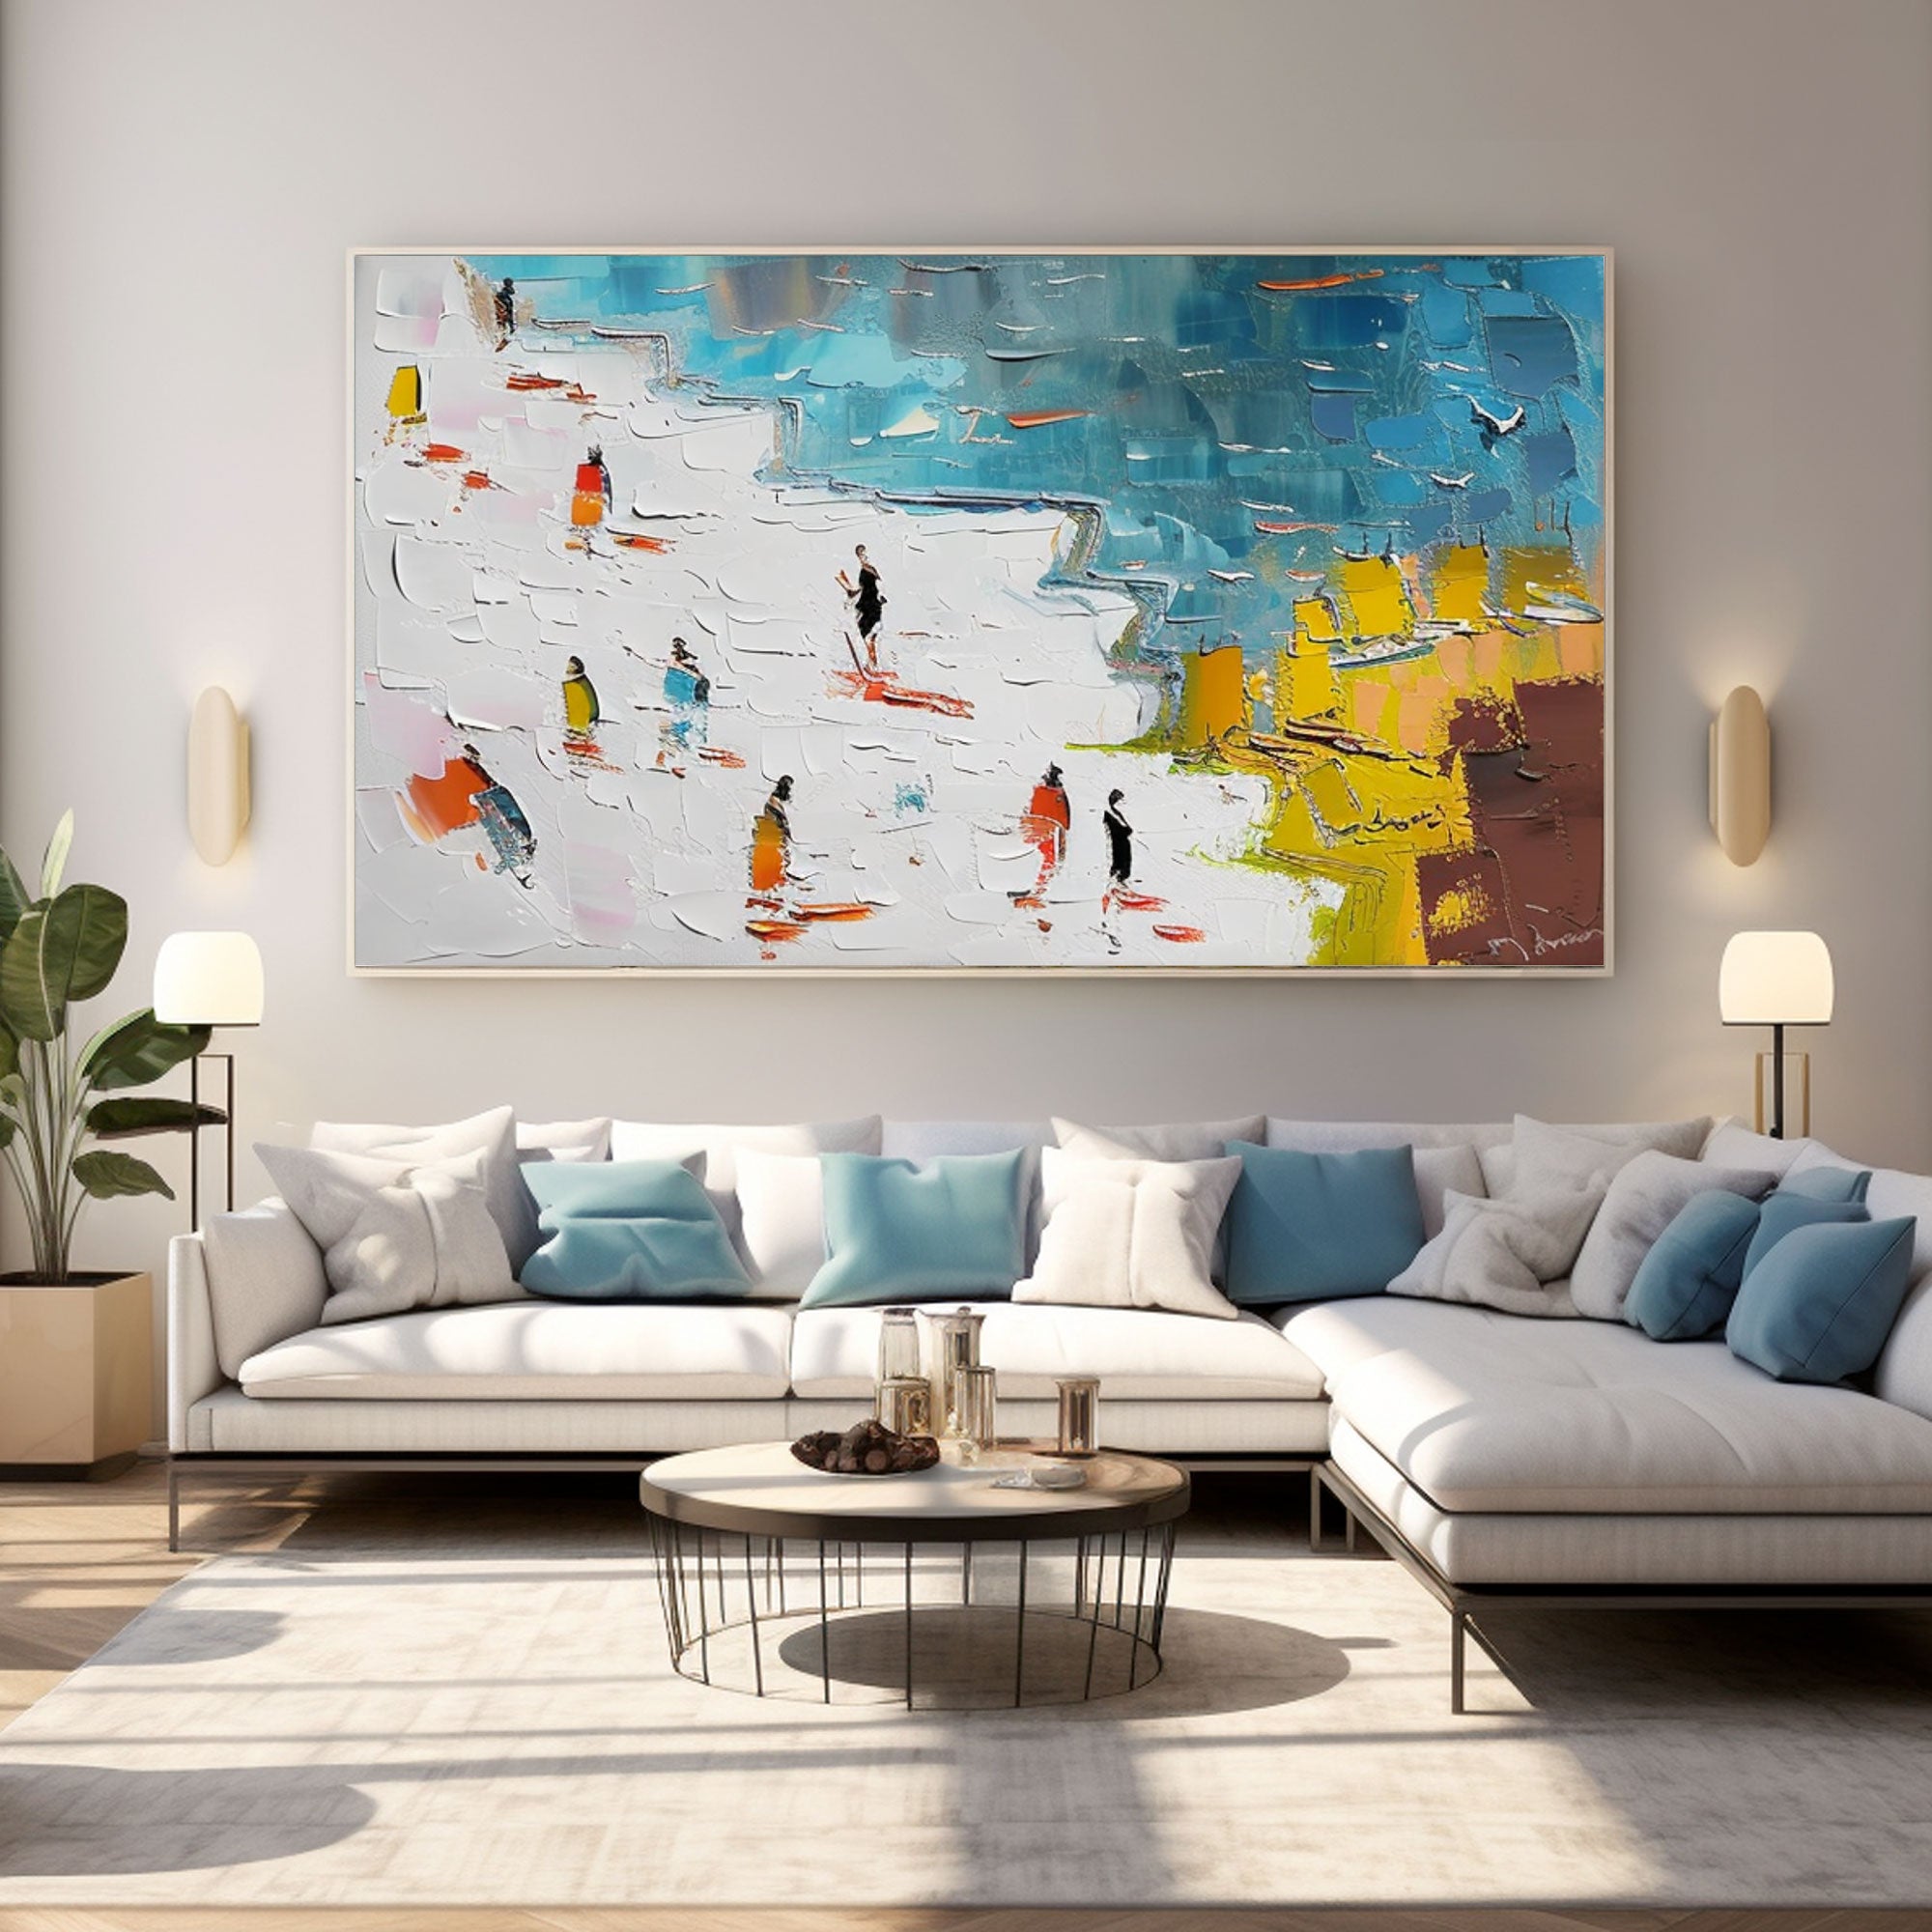 Acrylic Colorful Abstract Art Painting "Stroll by the Sea"